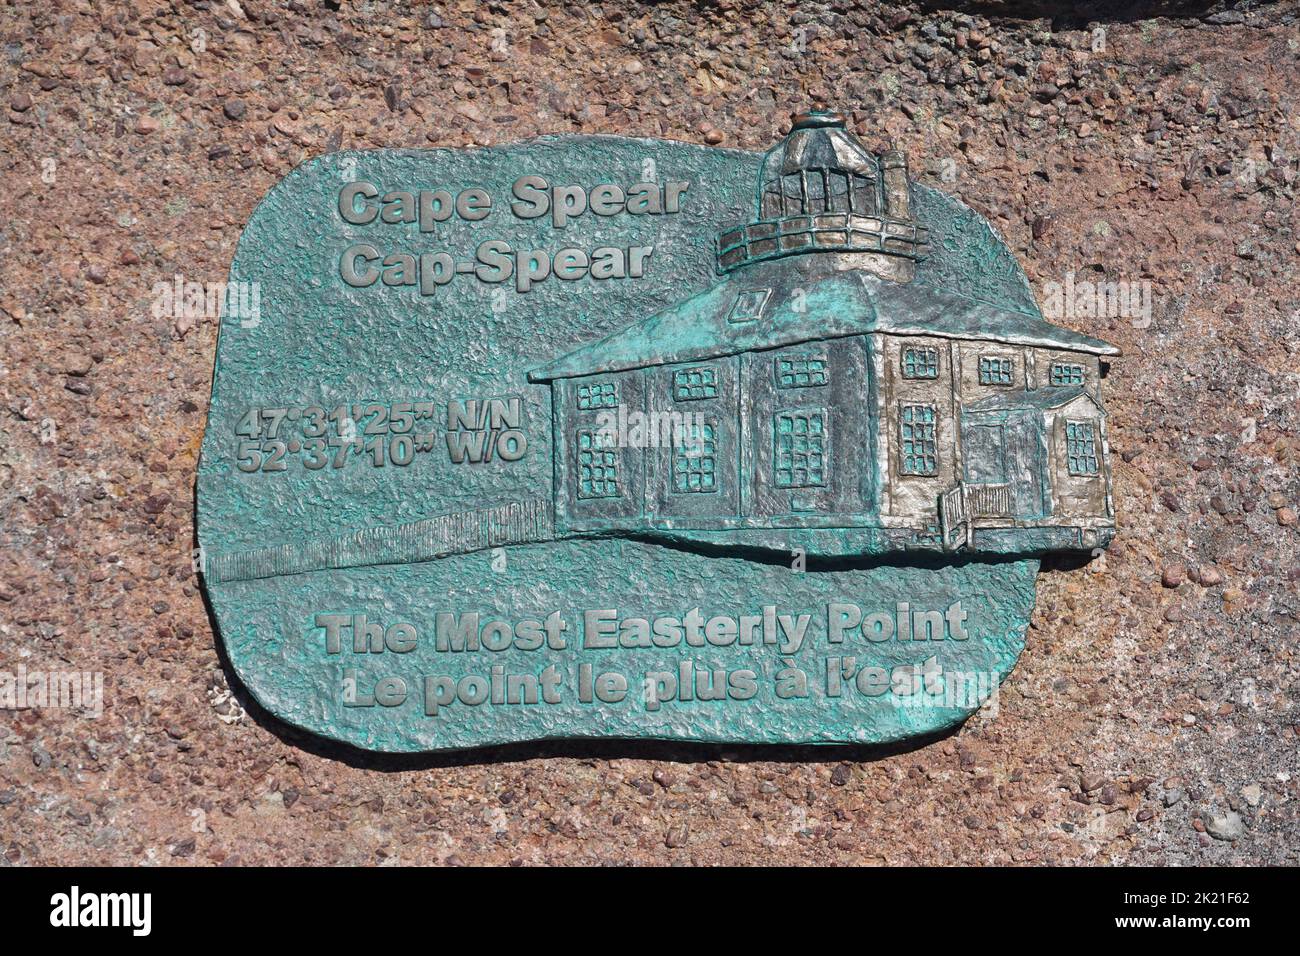 Cape Spear, Newfoundland, Canada: A copper marker in English and French notes the location of the most easterly point of land in North America. Stock Photo